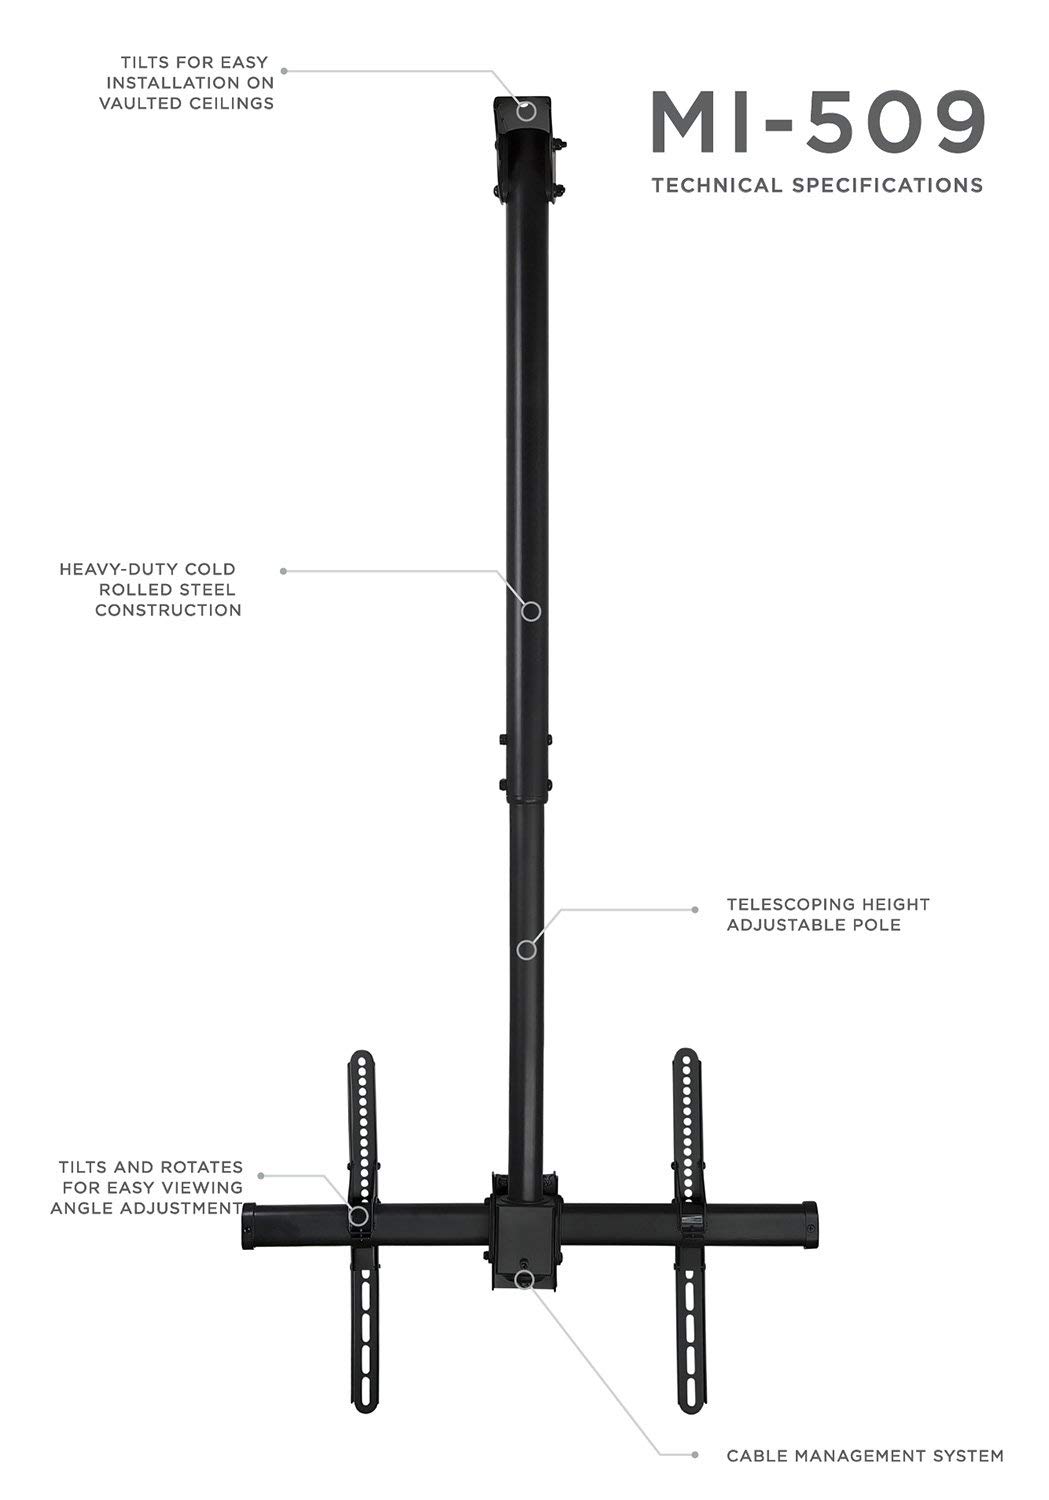 Mount-It Ceiling TV Mount Bracket, Fits 40-70 Inch Flat Panel Televisions, Adjustable Height Telescoping Tilt and Swivel and TV Wall Mount Shelf Bracket Under TV, Black